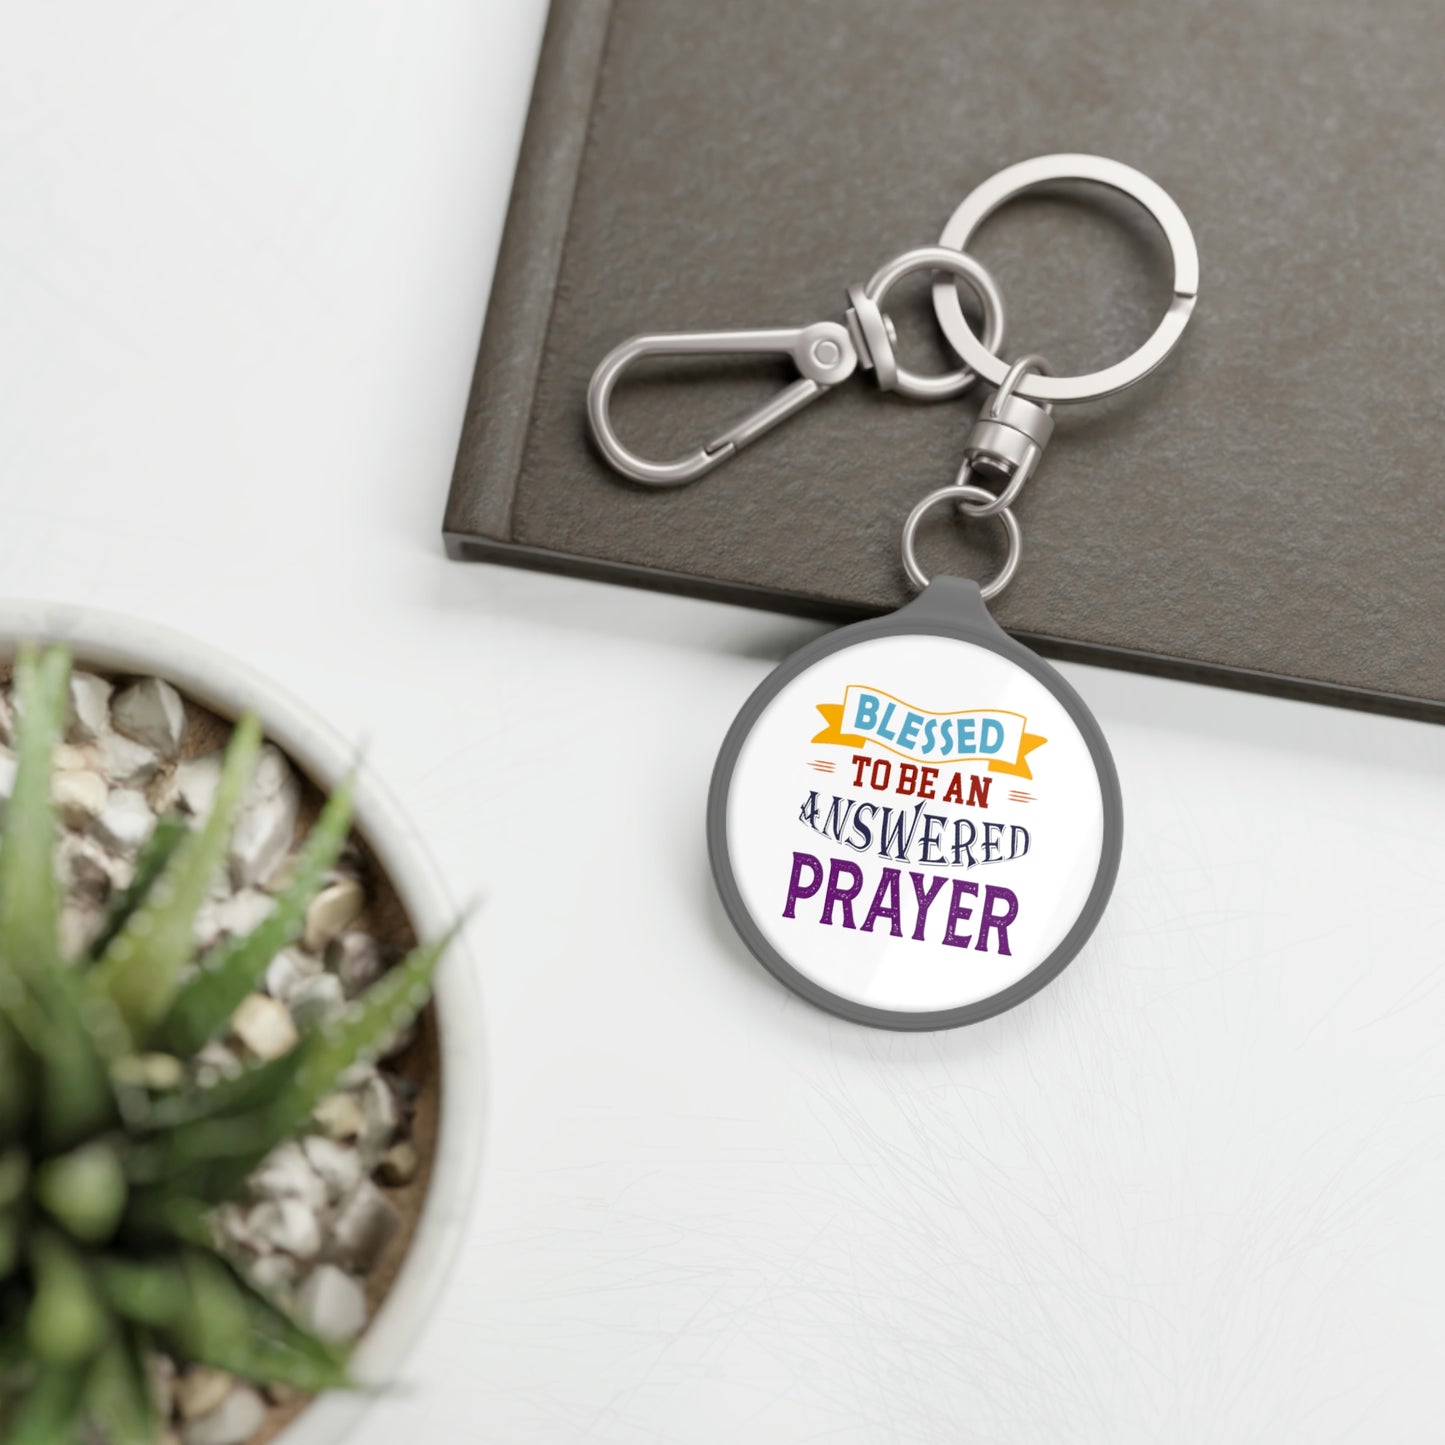 Blessed To Be An Answered Prayer Key Fob